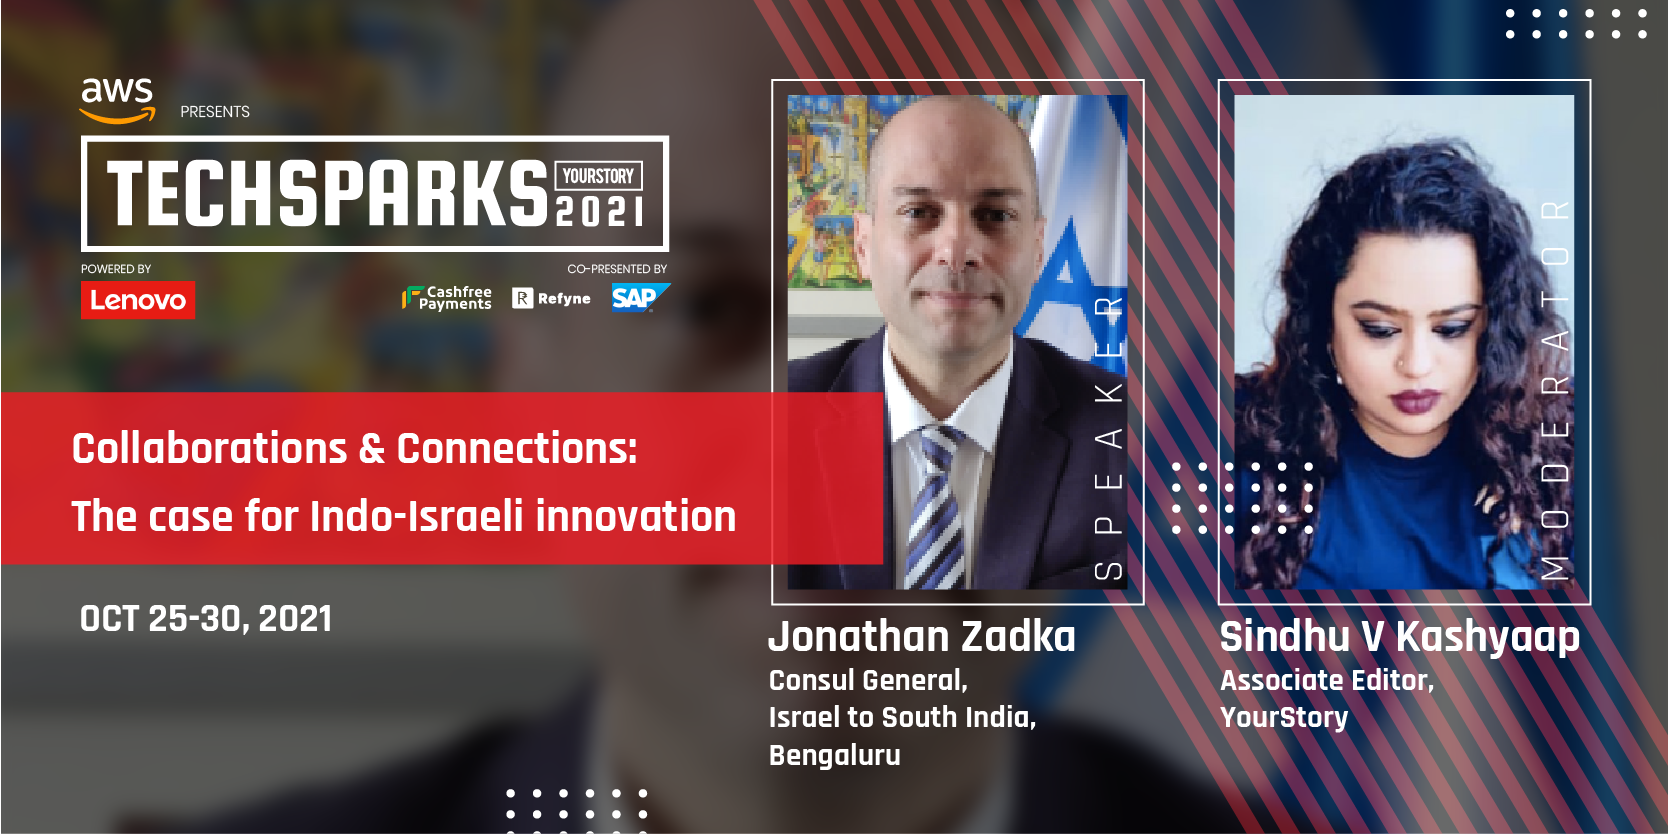 The case for collaborations: Jonathan Zadka, Consul General of Israel to South India, on improving India-Israel relations